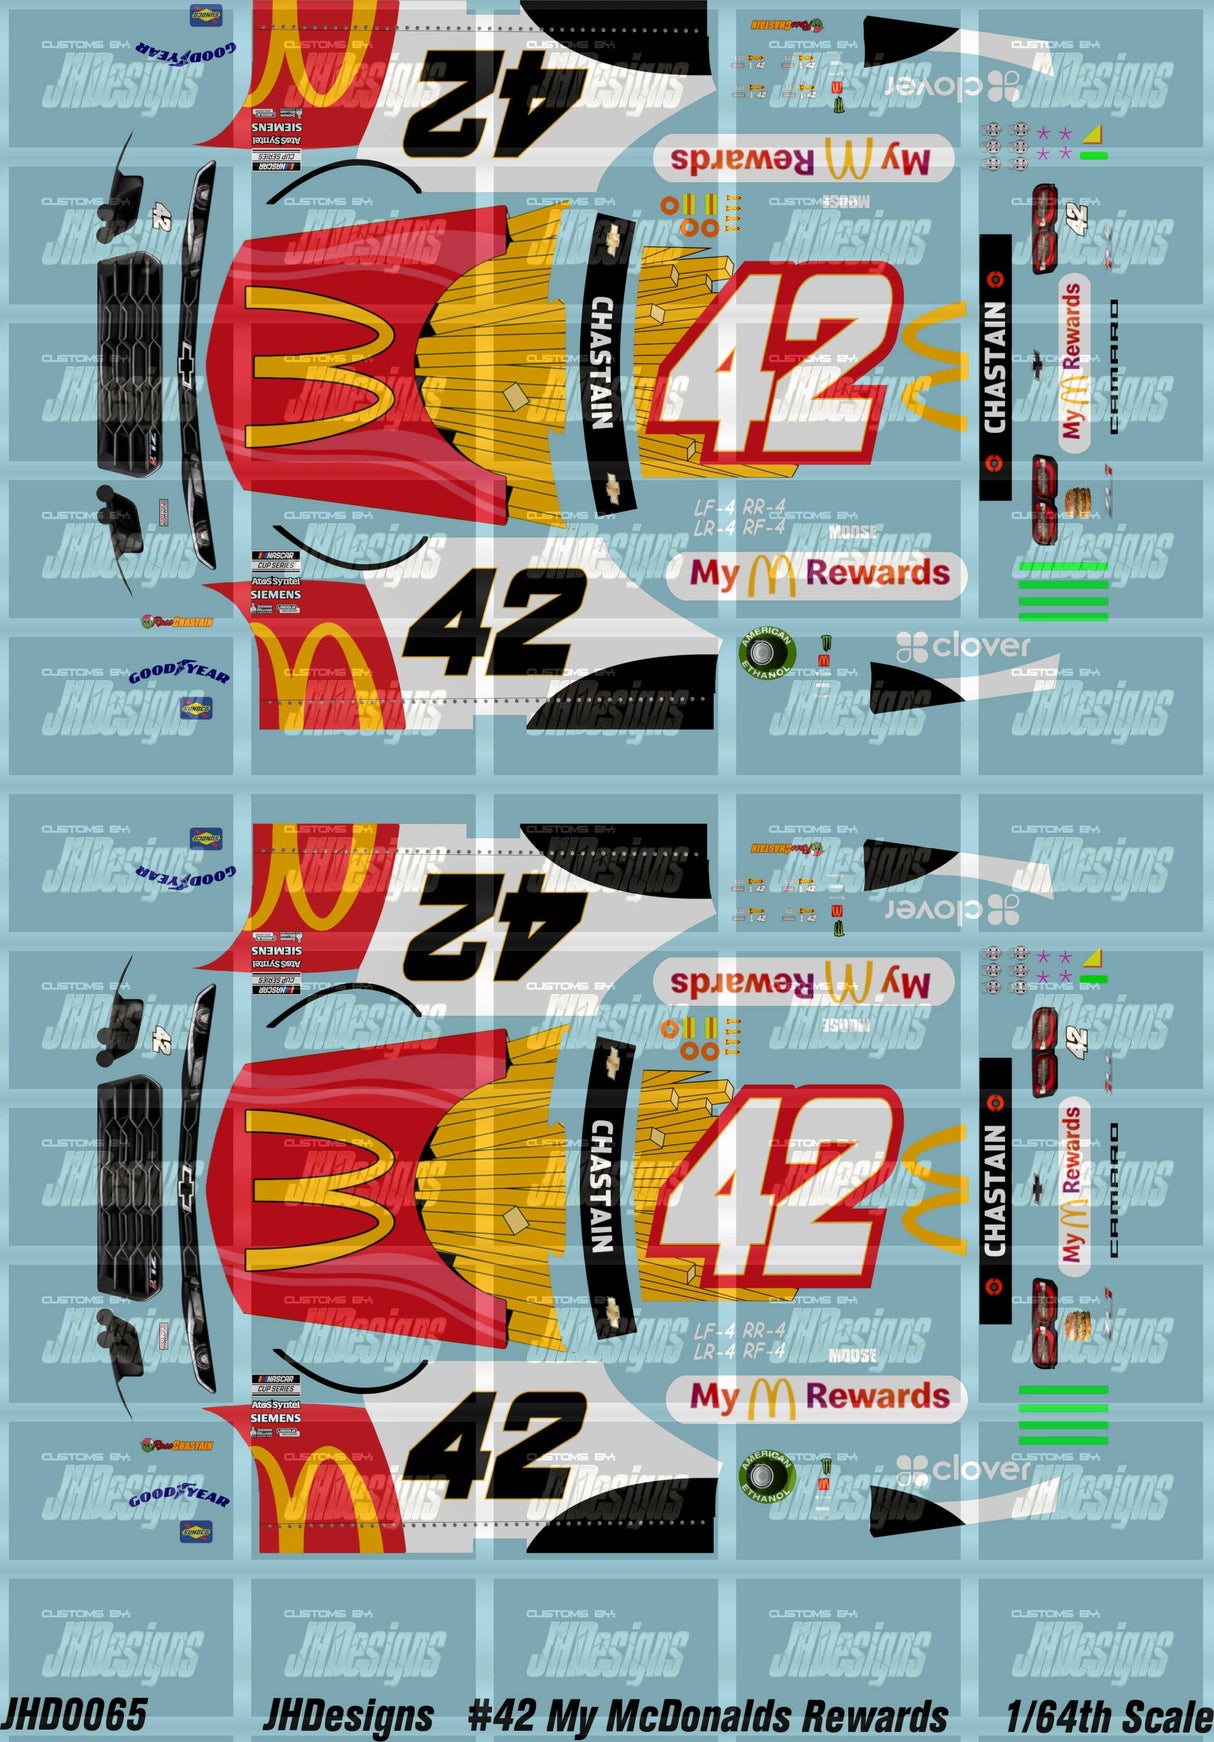 JH Designs Ross Chastain 2021 CUP #42 McDonald's My M Rewards 1:64 Racecar Decal Set